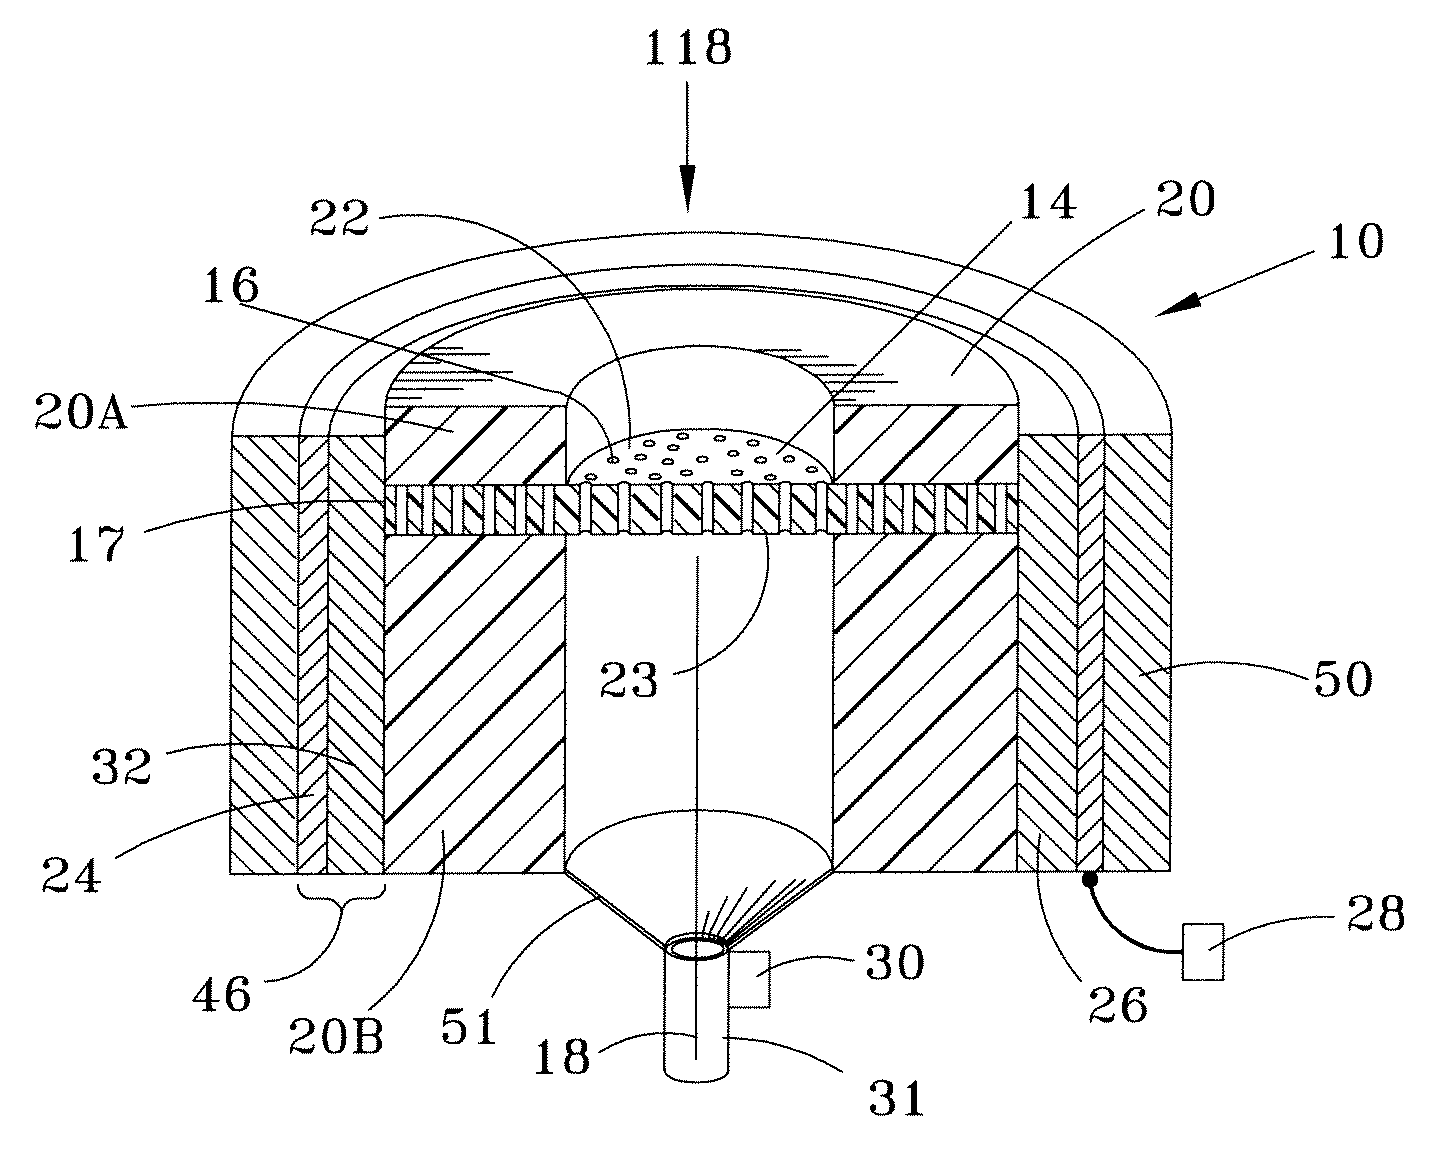 Filtering Apparatus and Method of Use